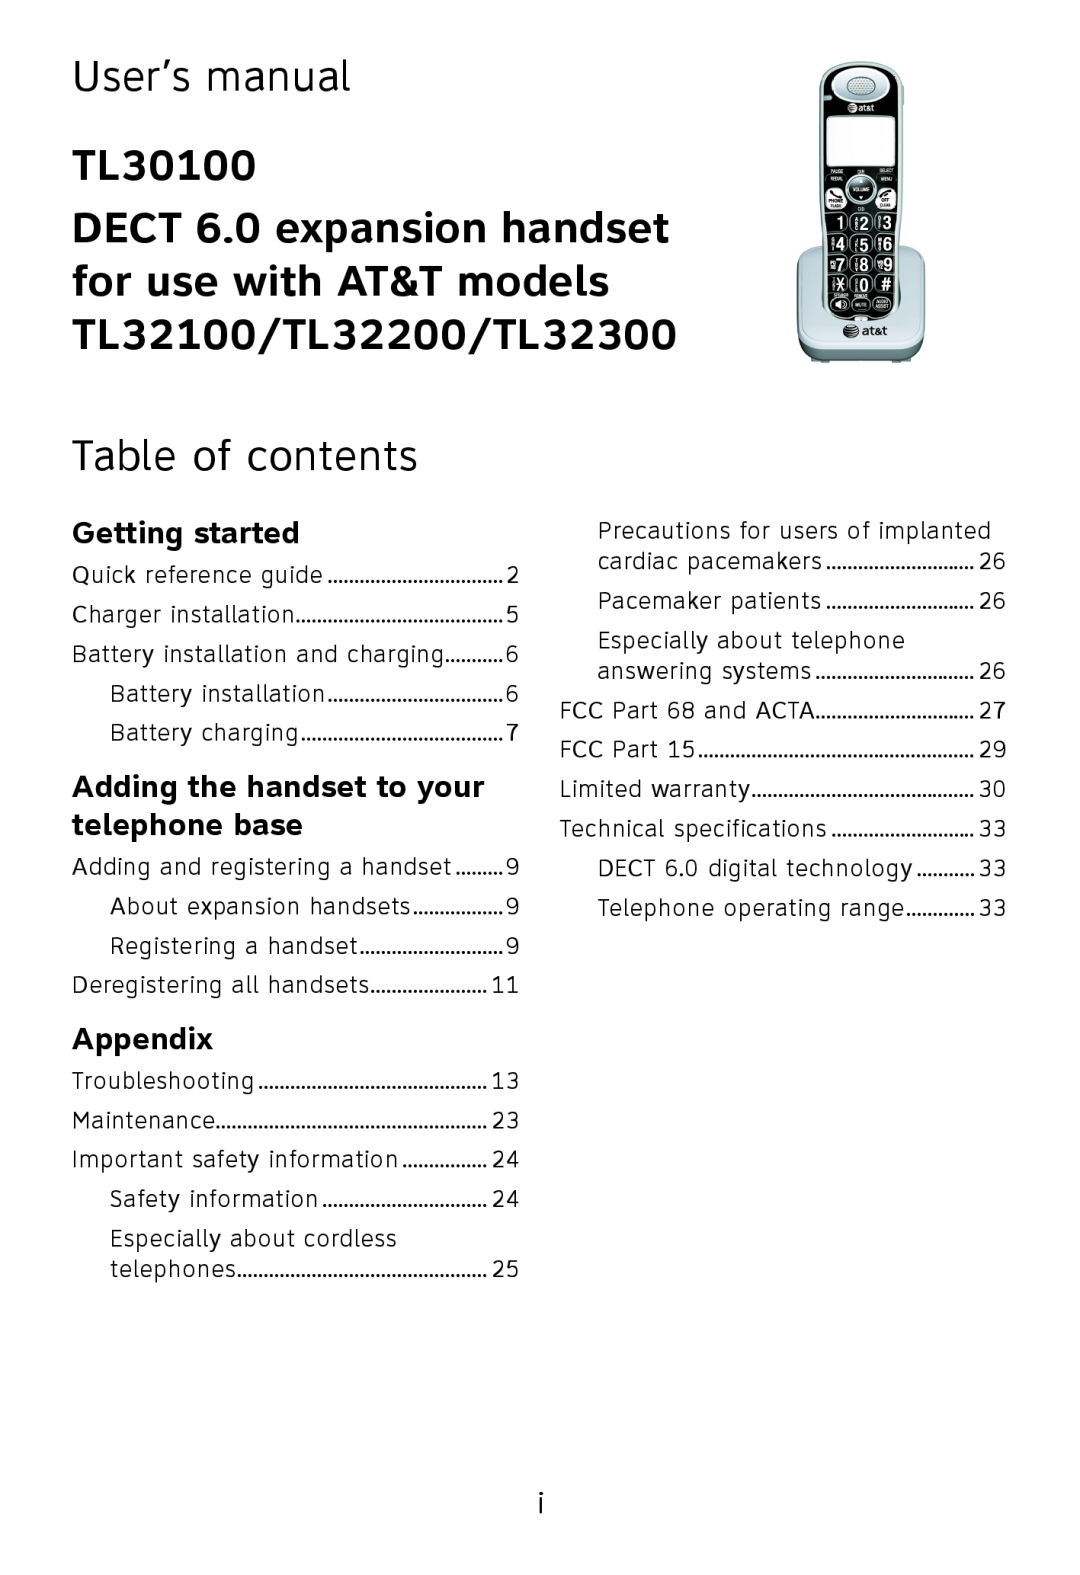 AT&T TL32300 Table of contents, Getting started, Adding the handset to your telephone base, User’s manual, TL30100 